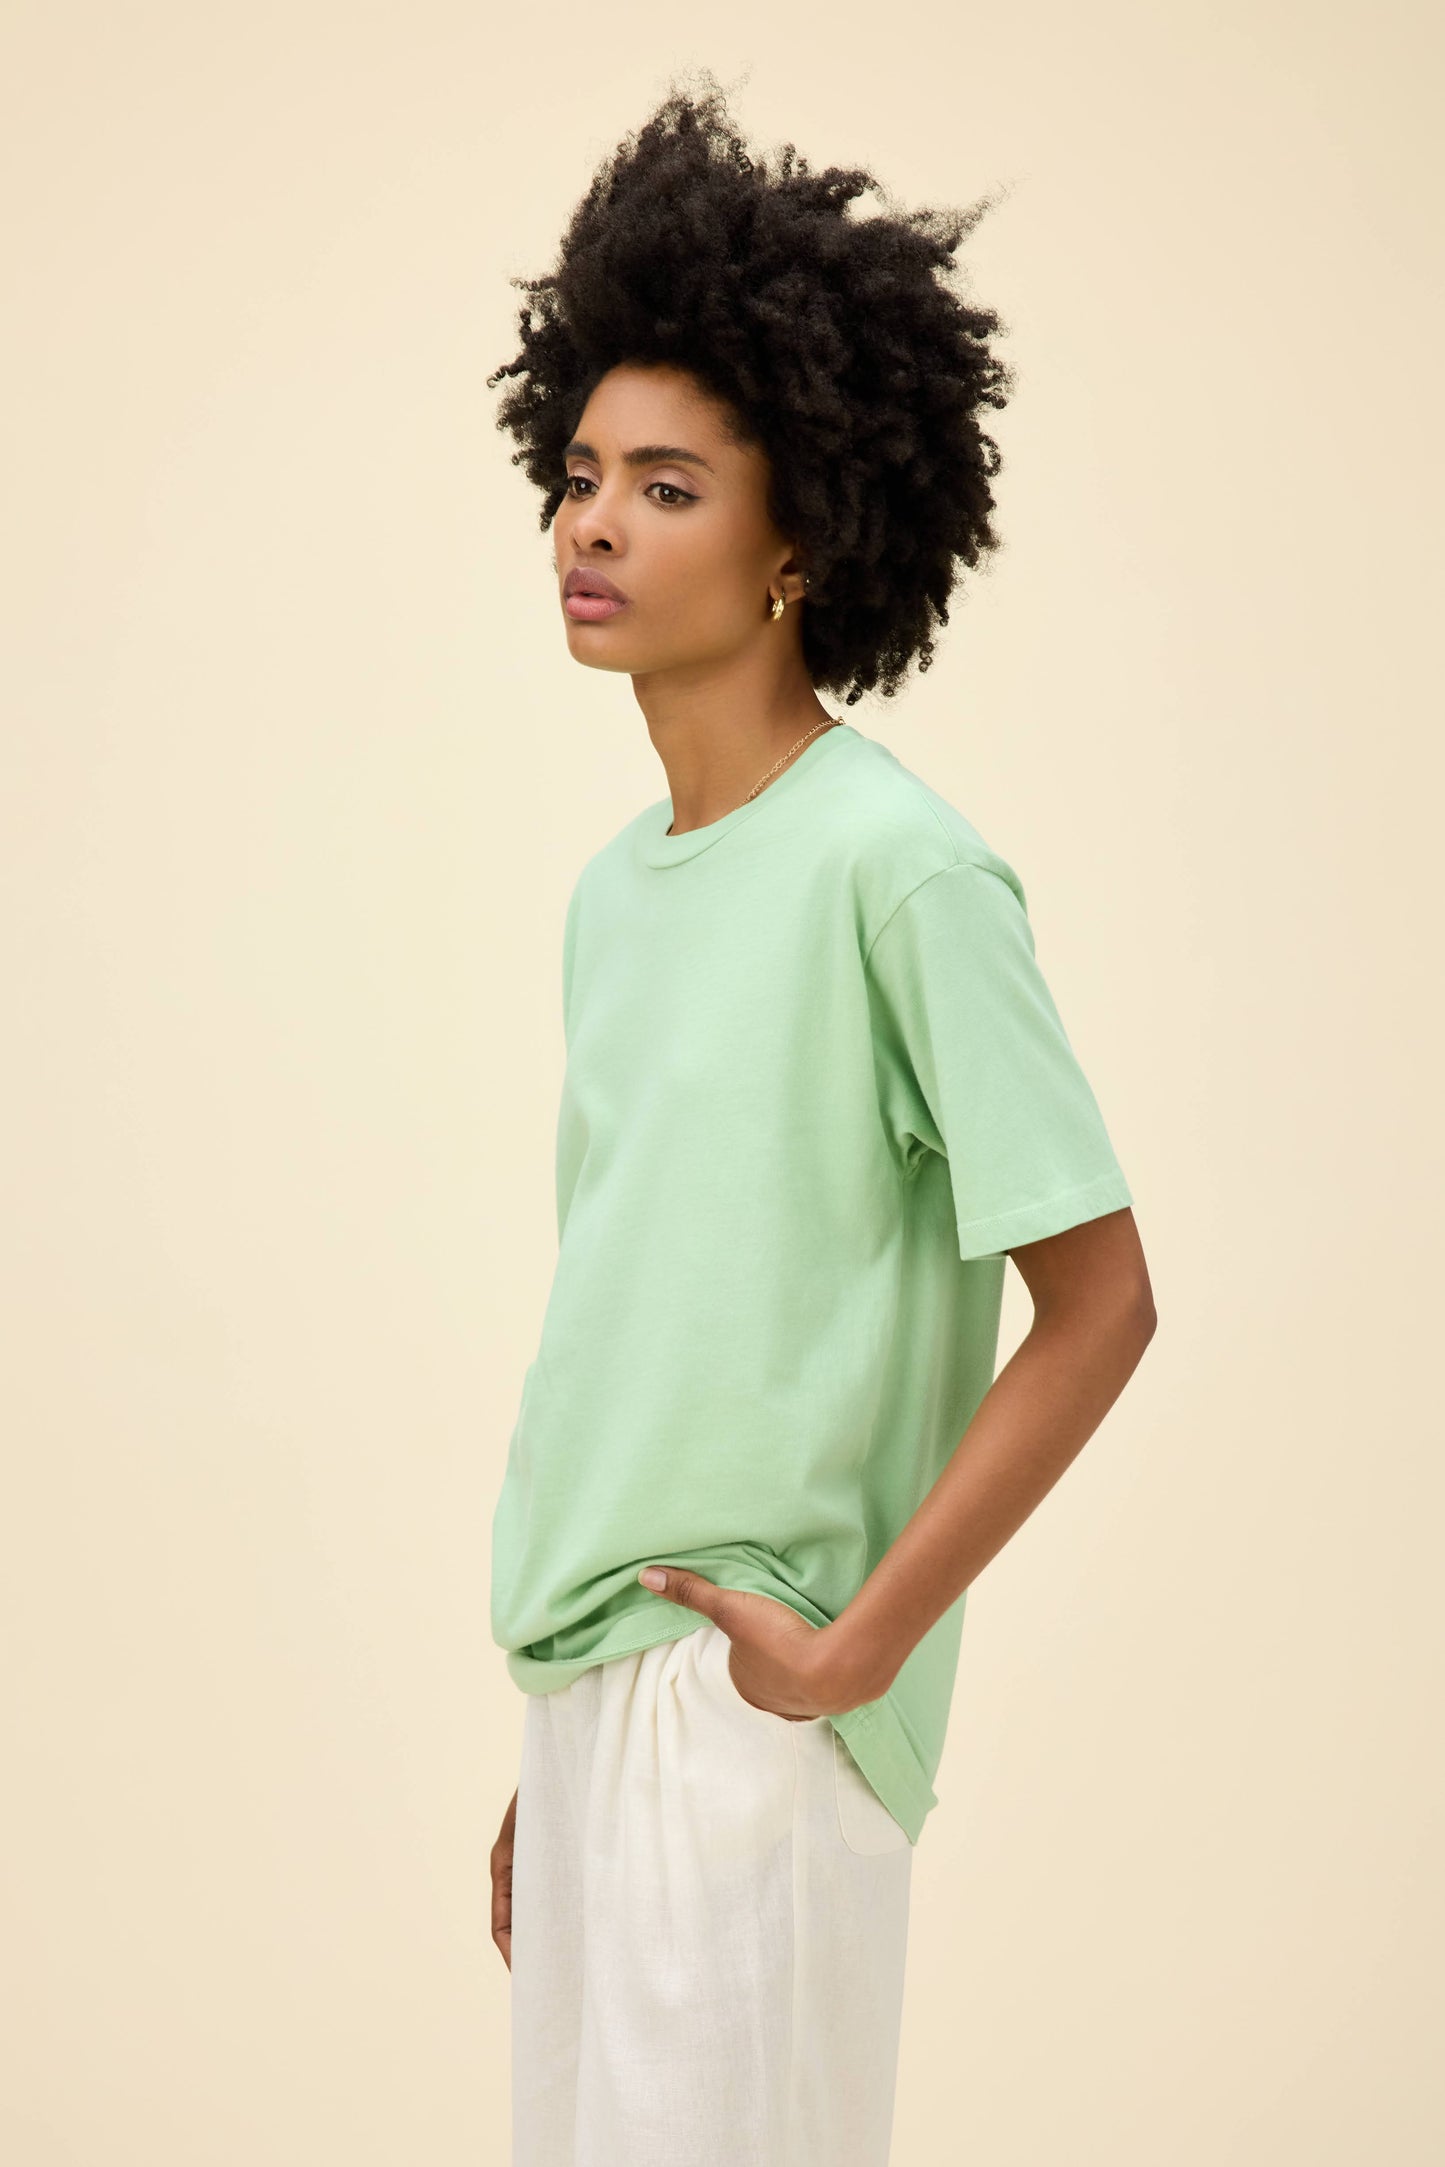 A model featuring a weekend tee in mint spray.